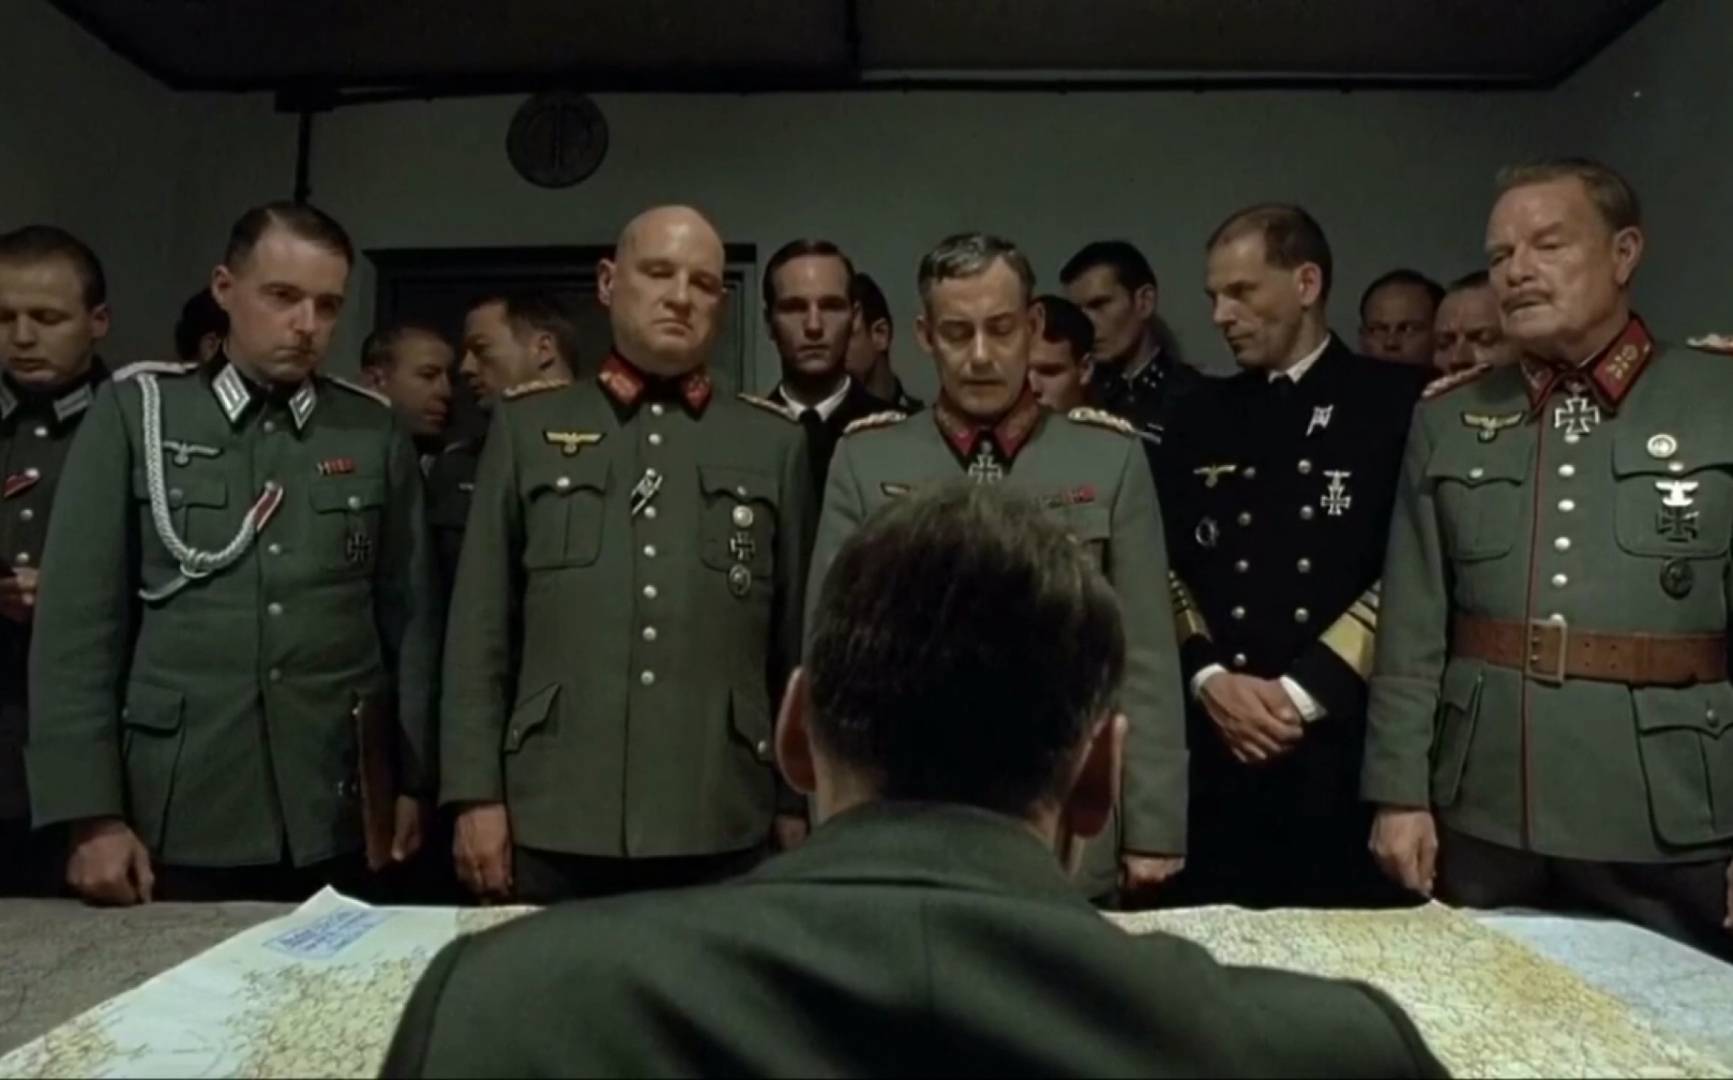 Quote from the film Downfall by Oliver Hirschbiegel. 2004. Germany, Austria, Italy